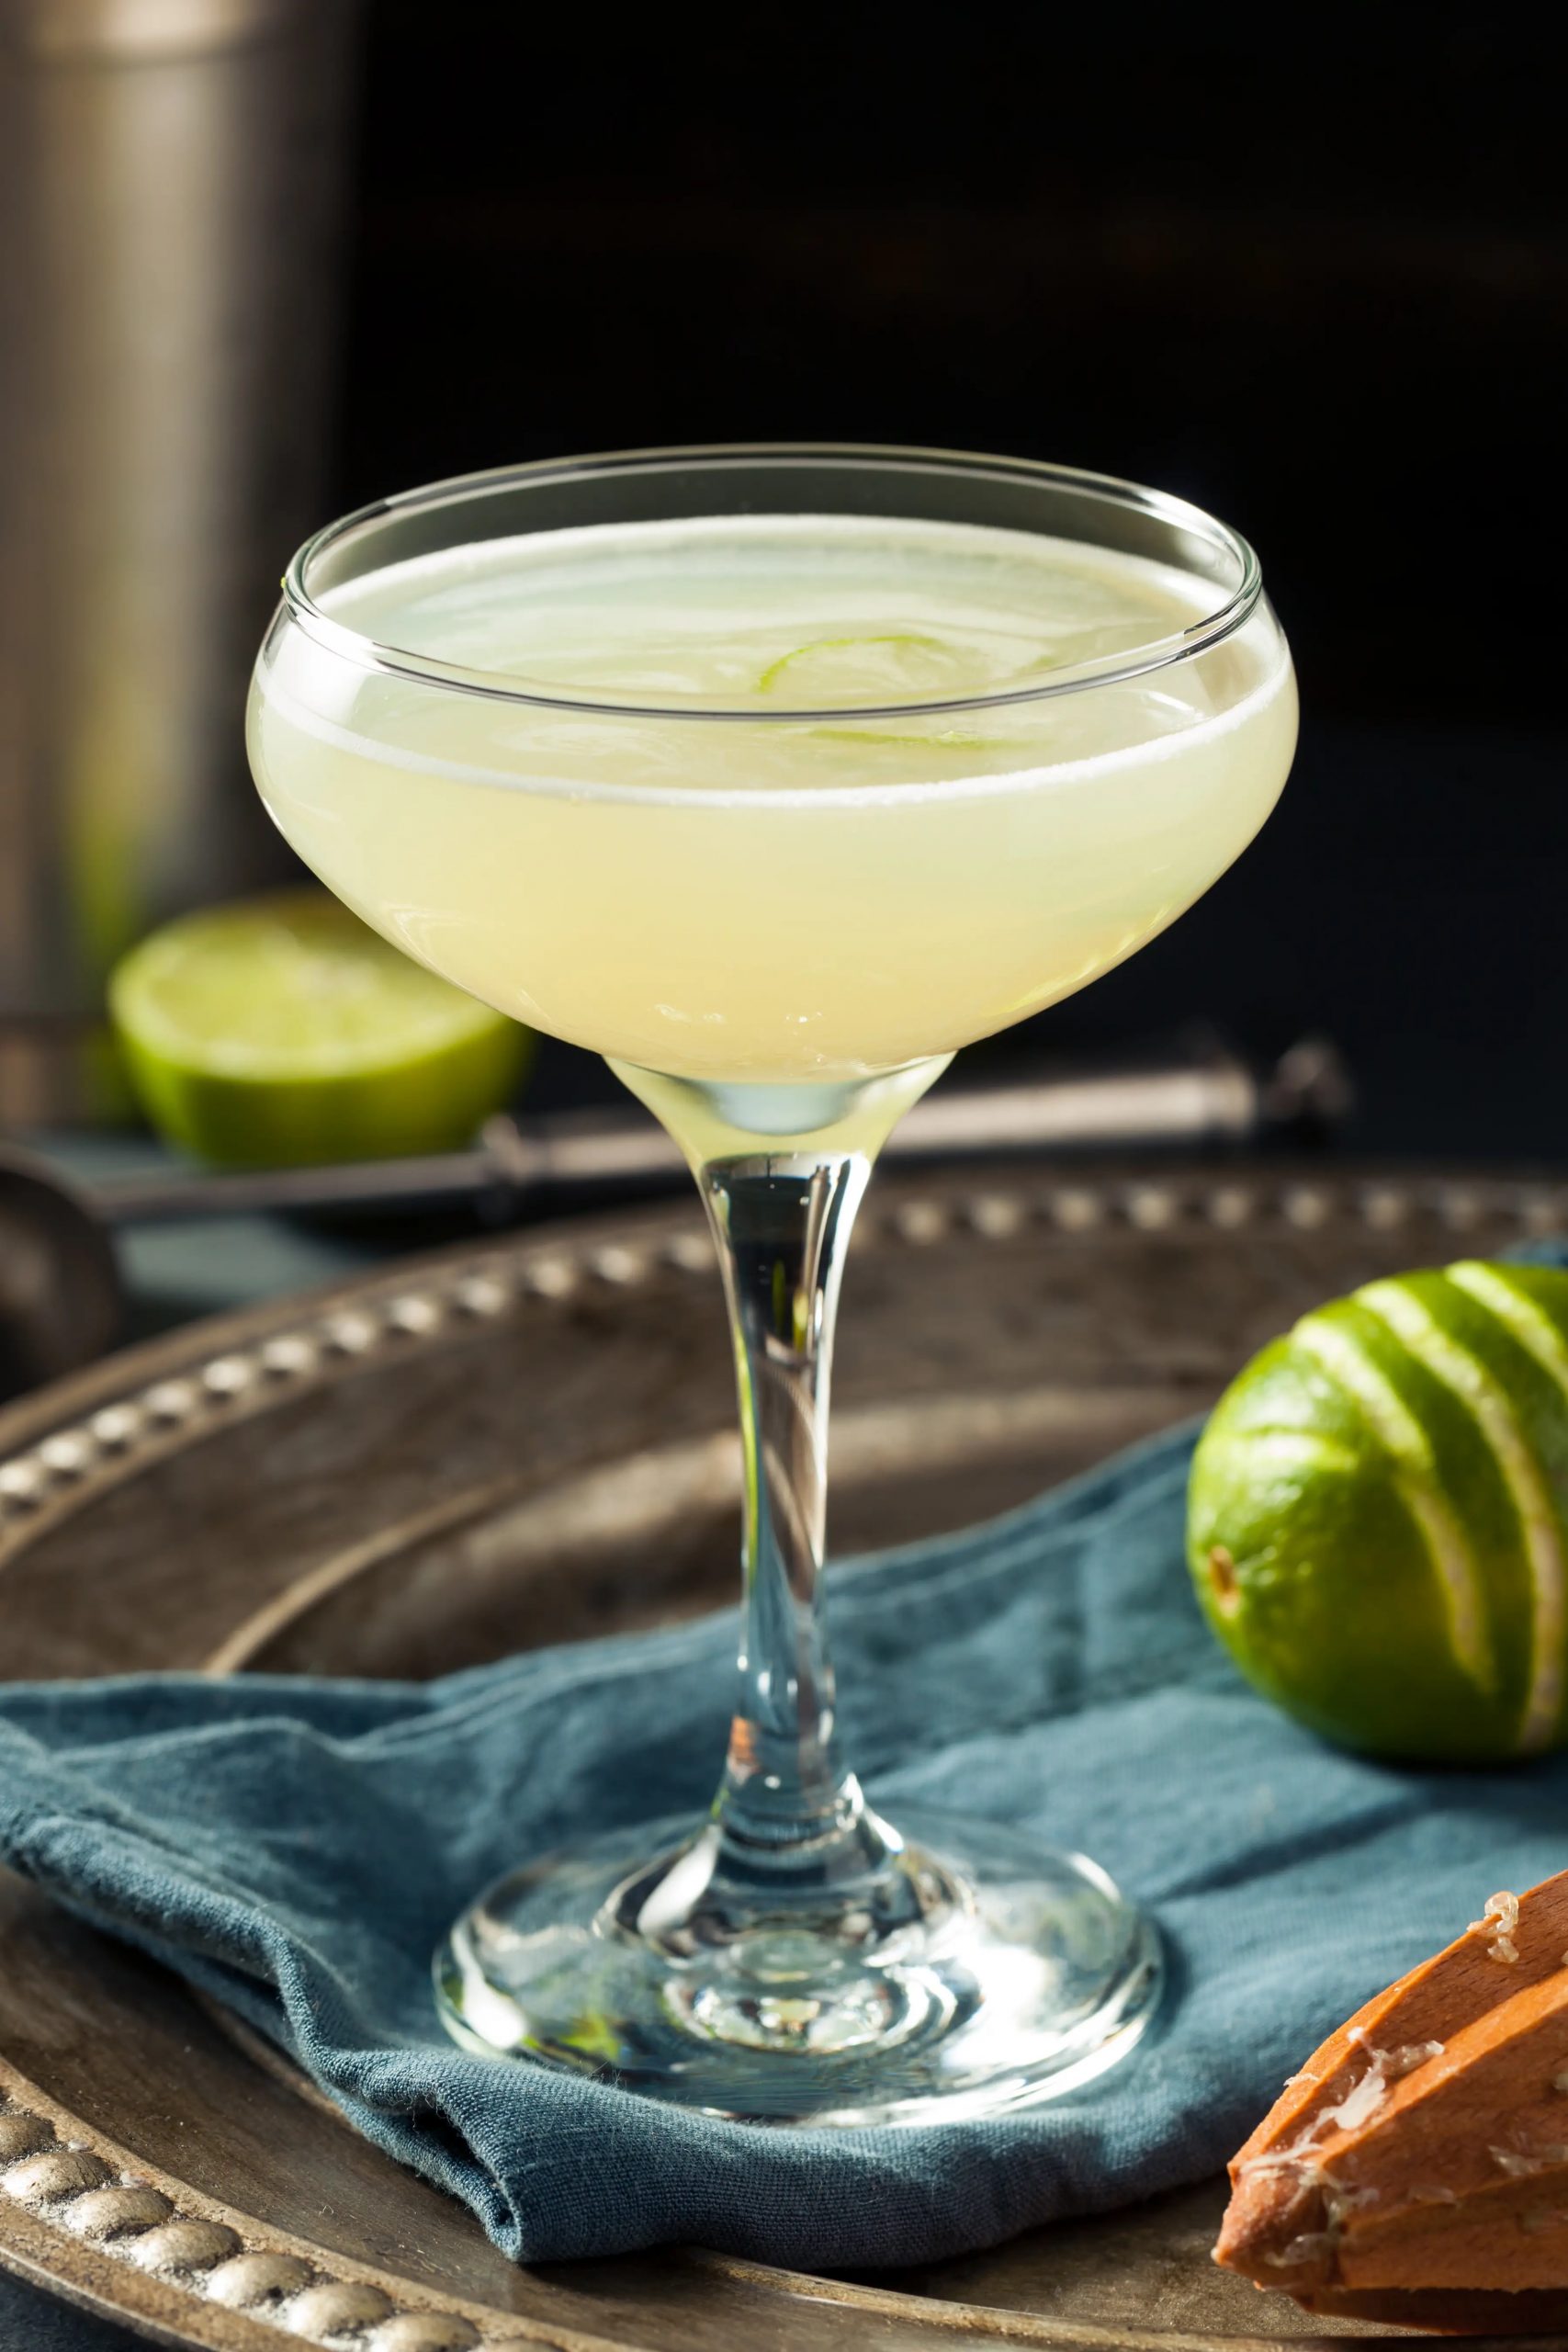 How to make a Gin Gimlet